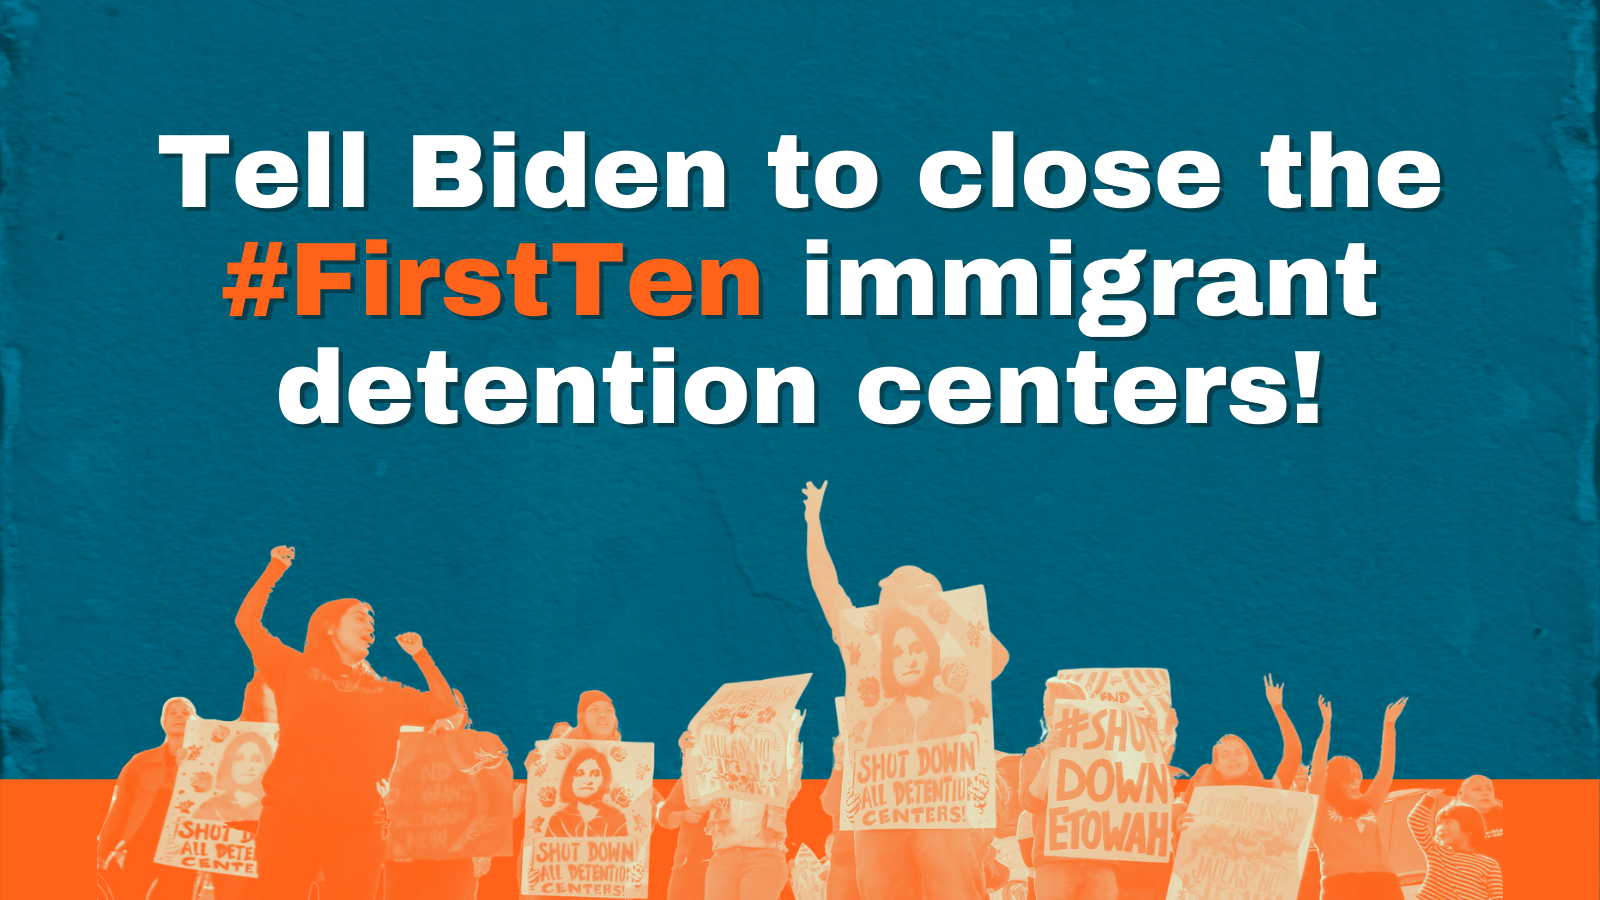 Graphic with a crowd advocating for Biden to close the first Ten immigrant detention centers.